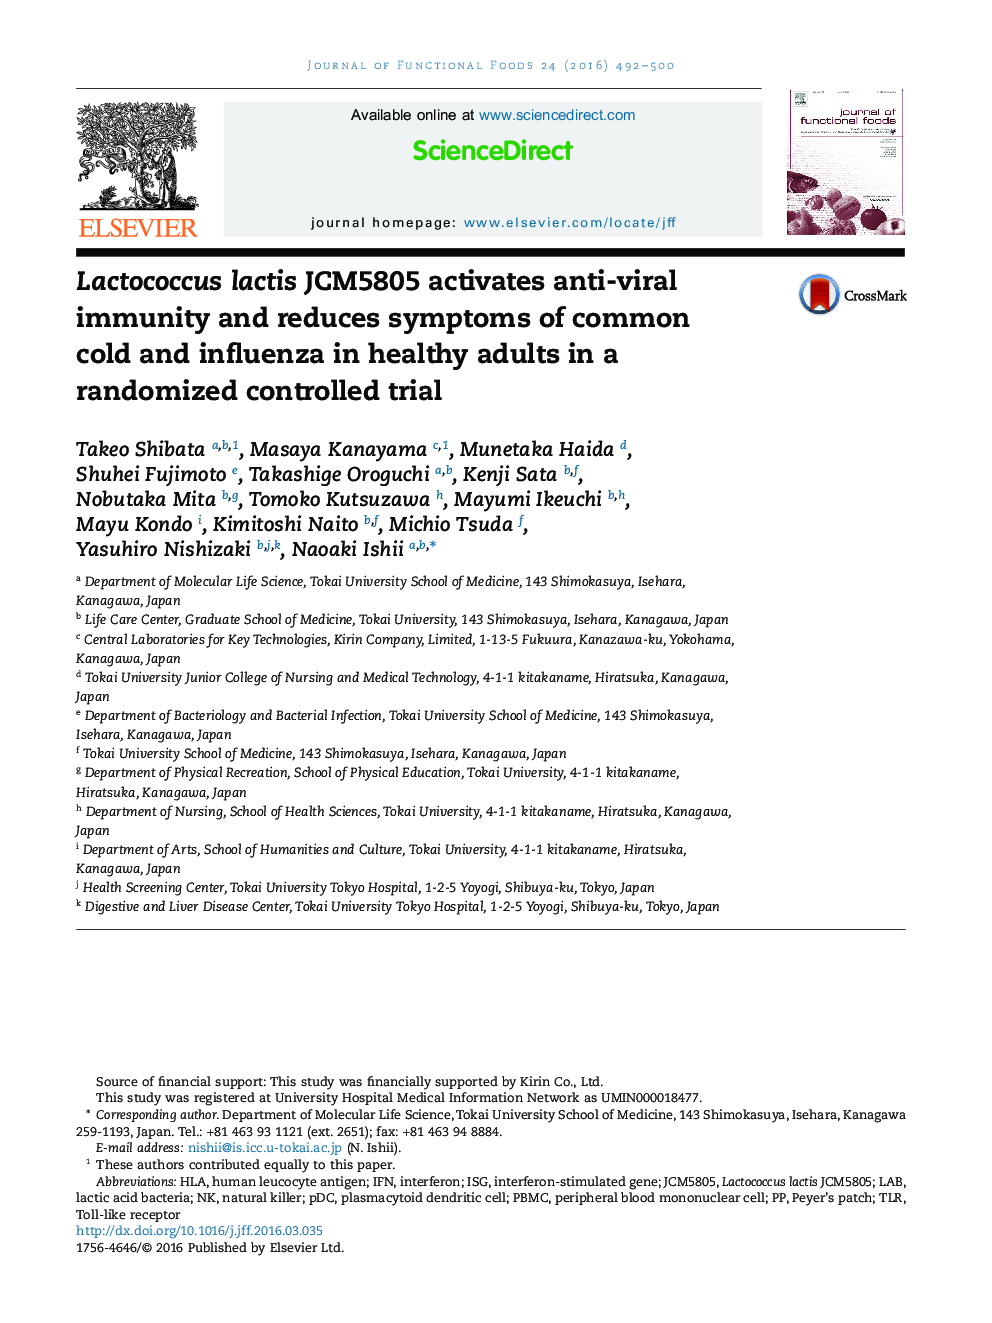 Lactococcus lactis JCM5805 activates anti-viral immunity and reduces symptoms of common cold and influenza in healthy adults in a randomized controlled trial 